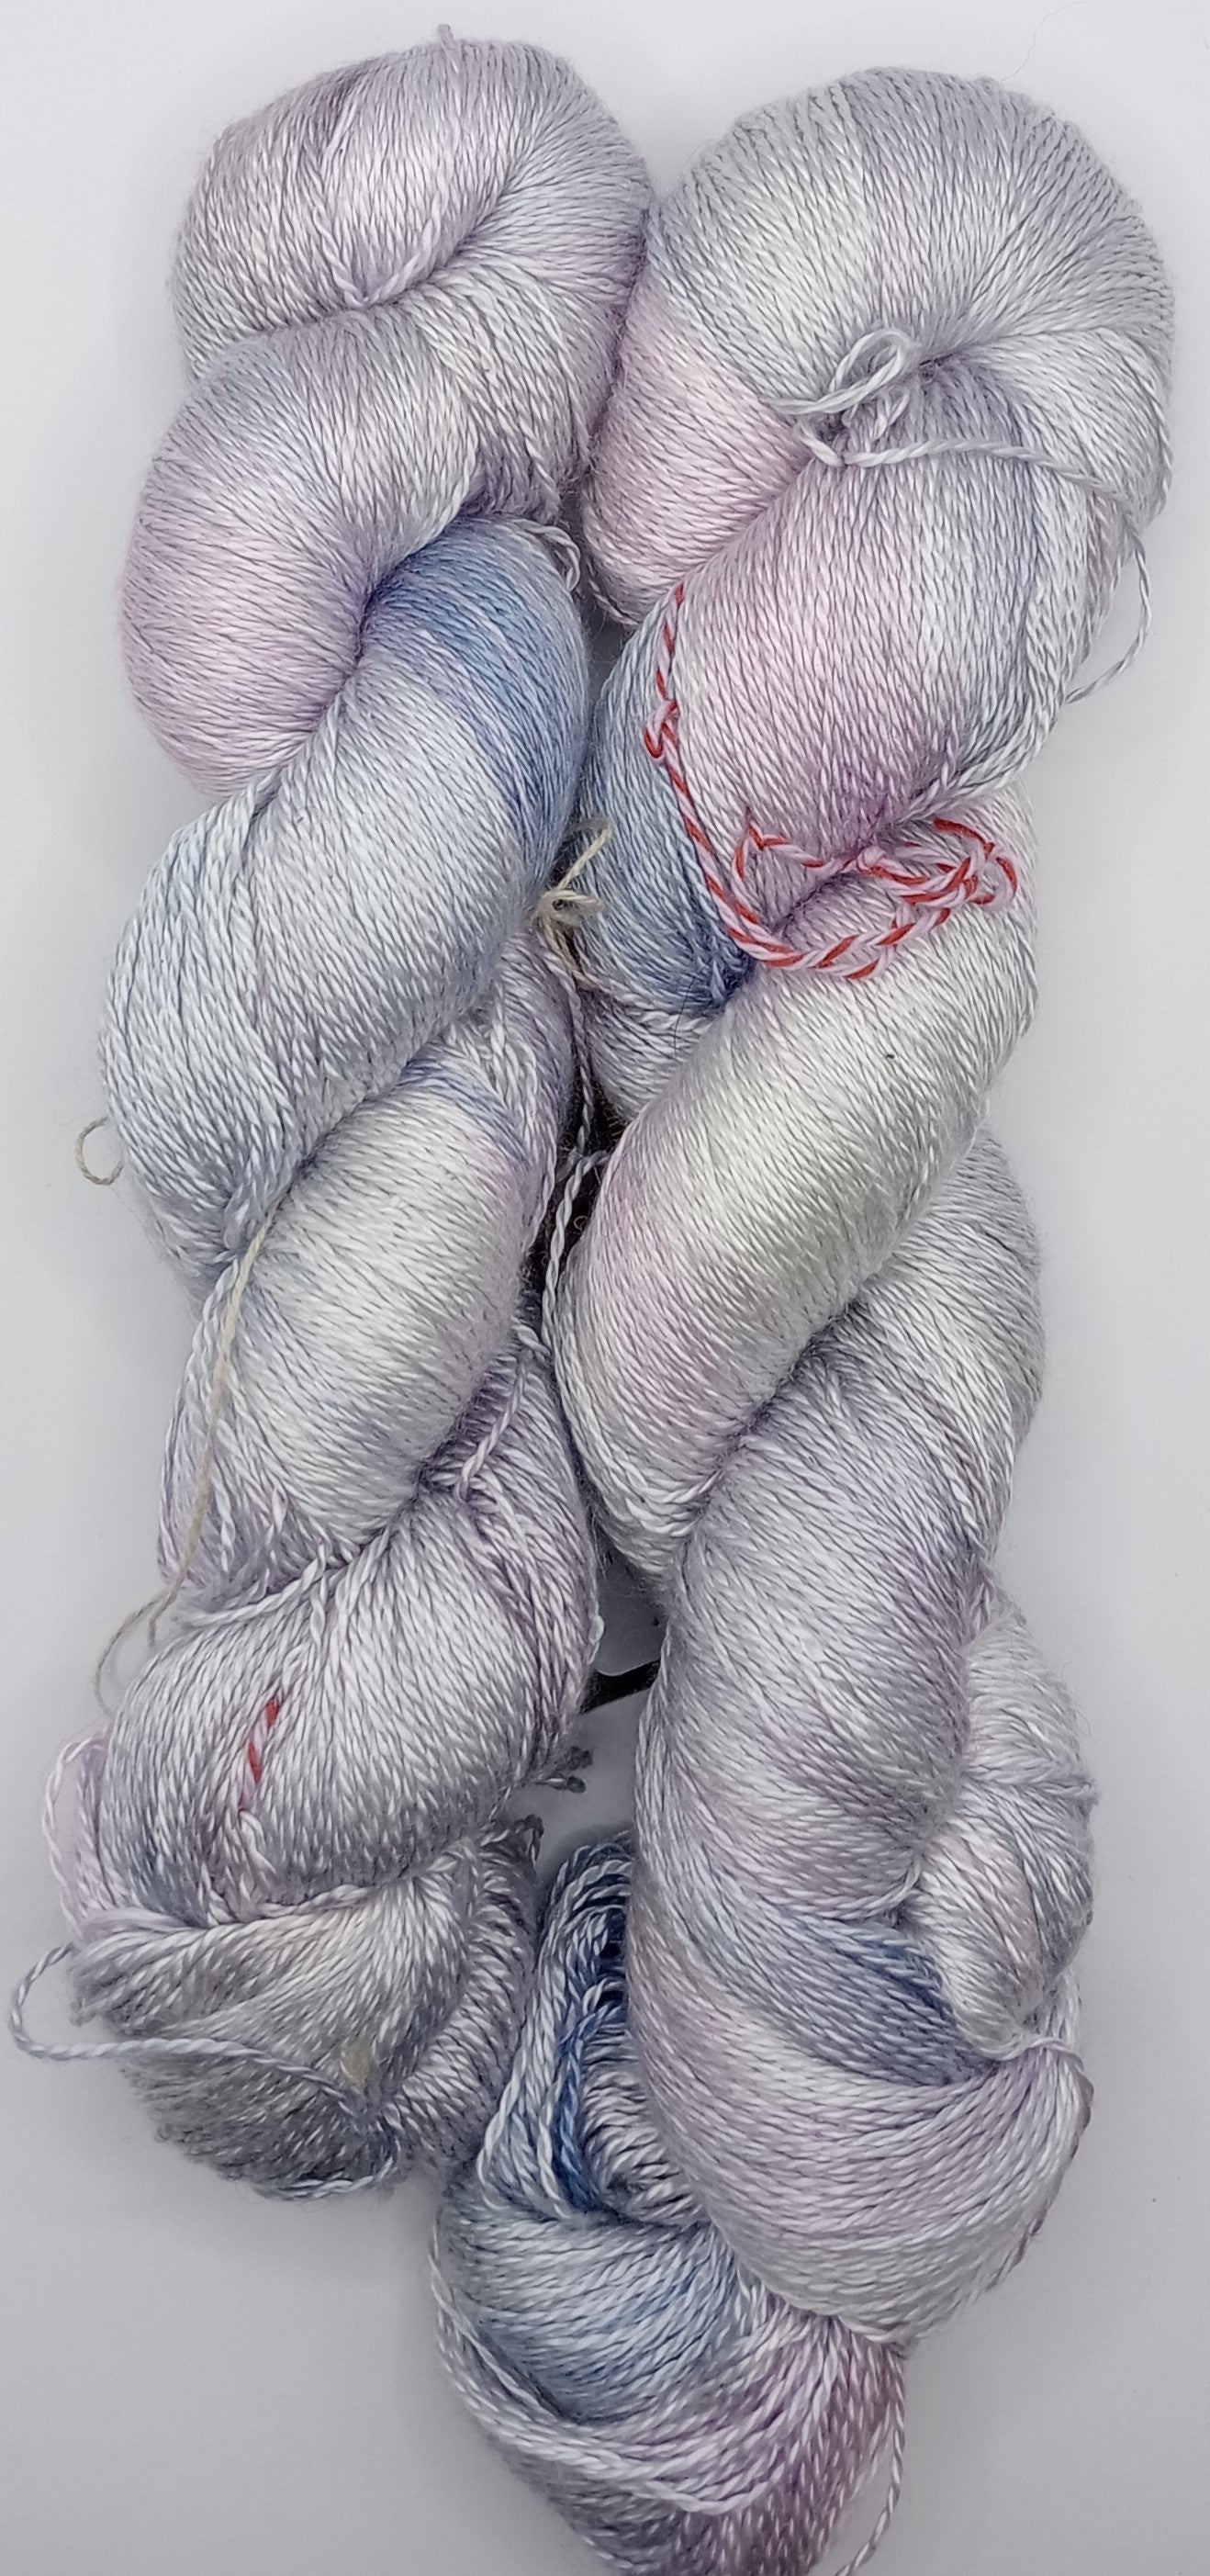 100G 'A' Grade Pure Mulberry Silk- "SIlver" Hand Dyed Luxury Lace weight